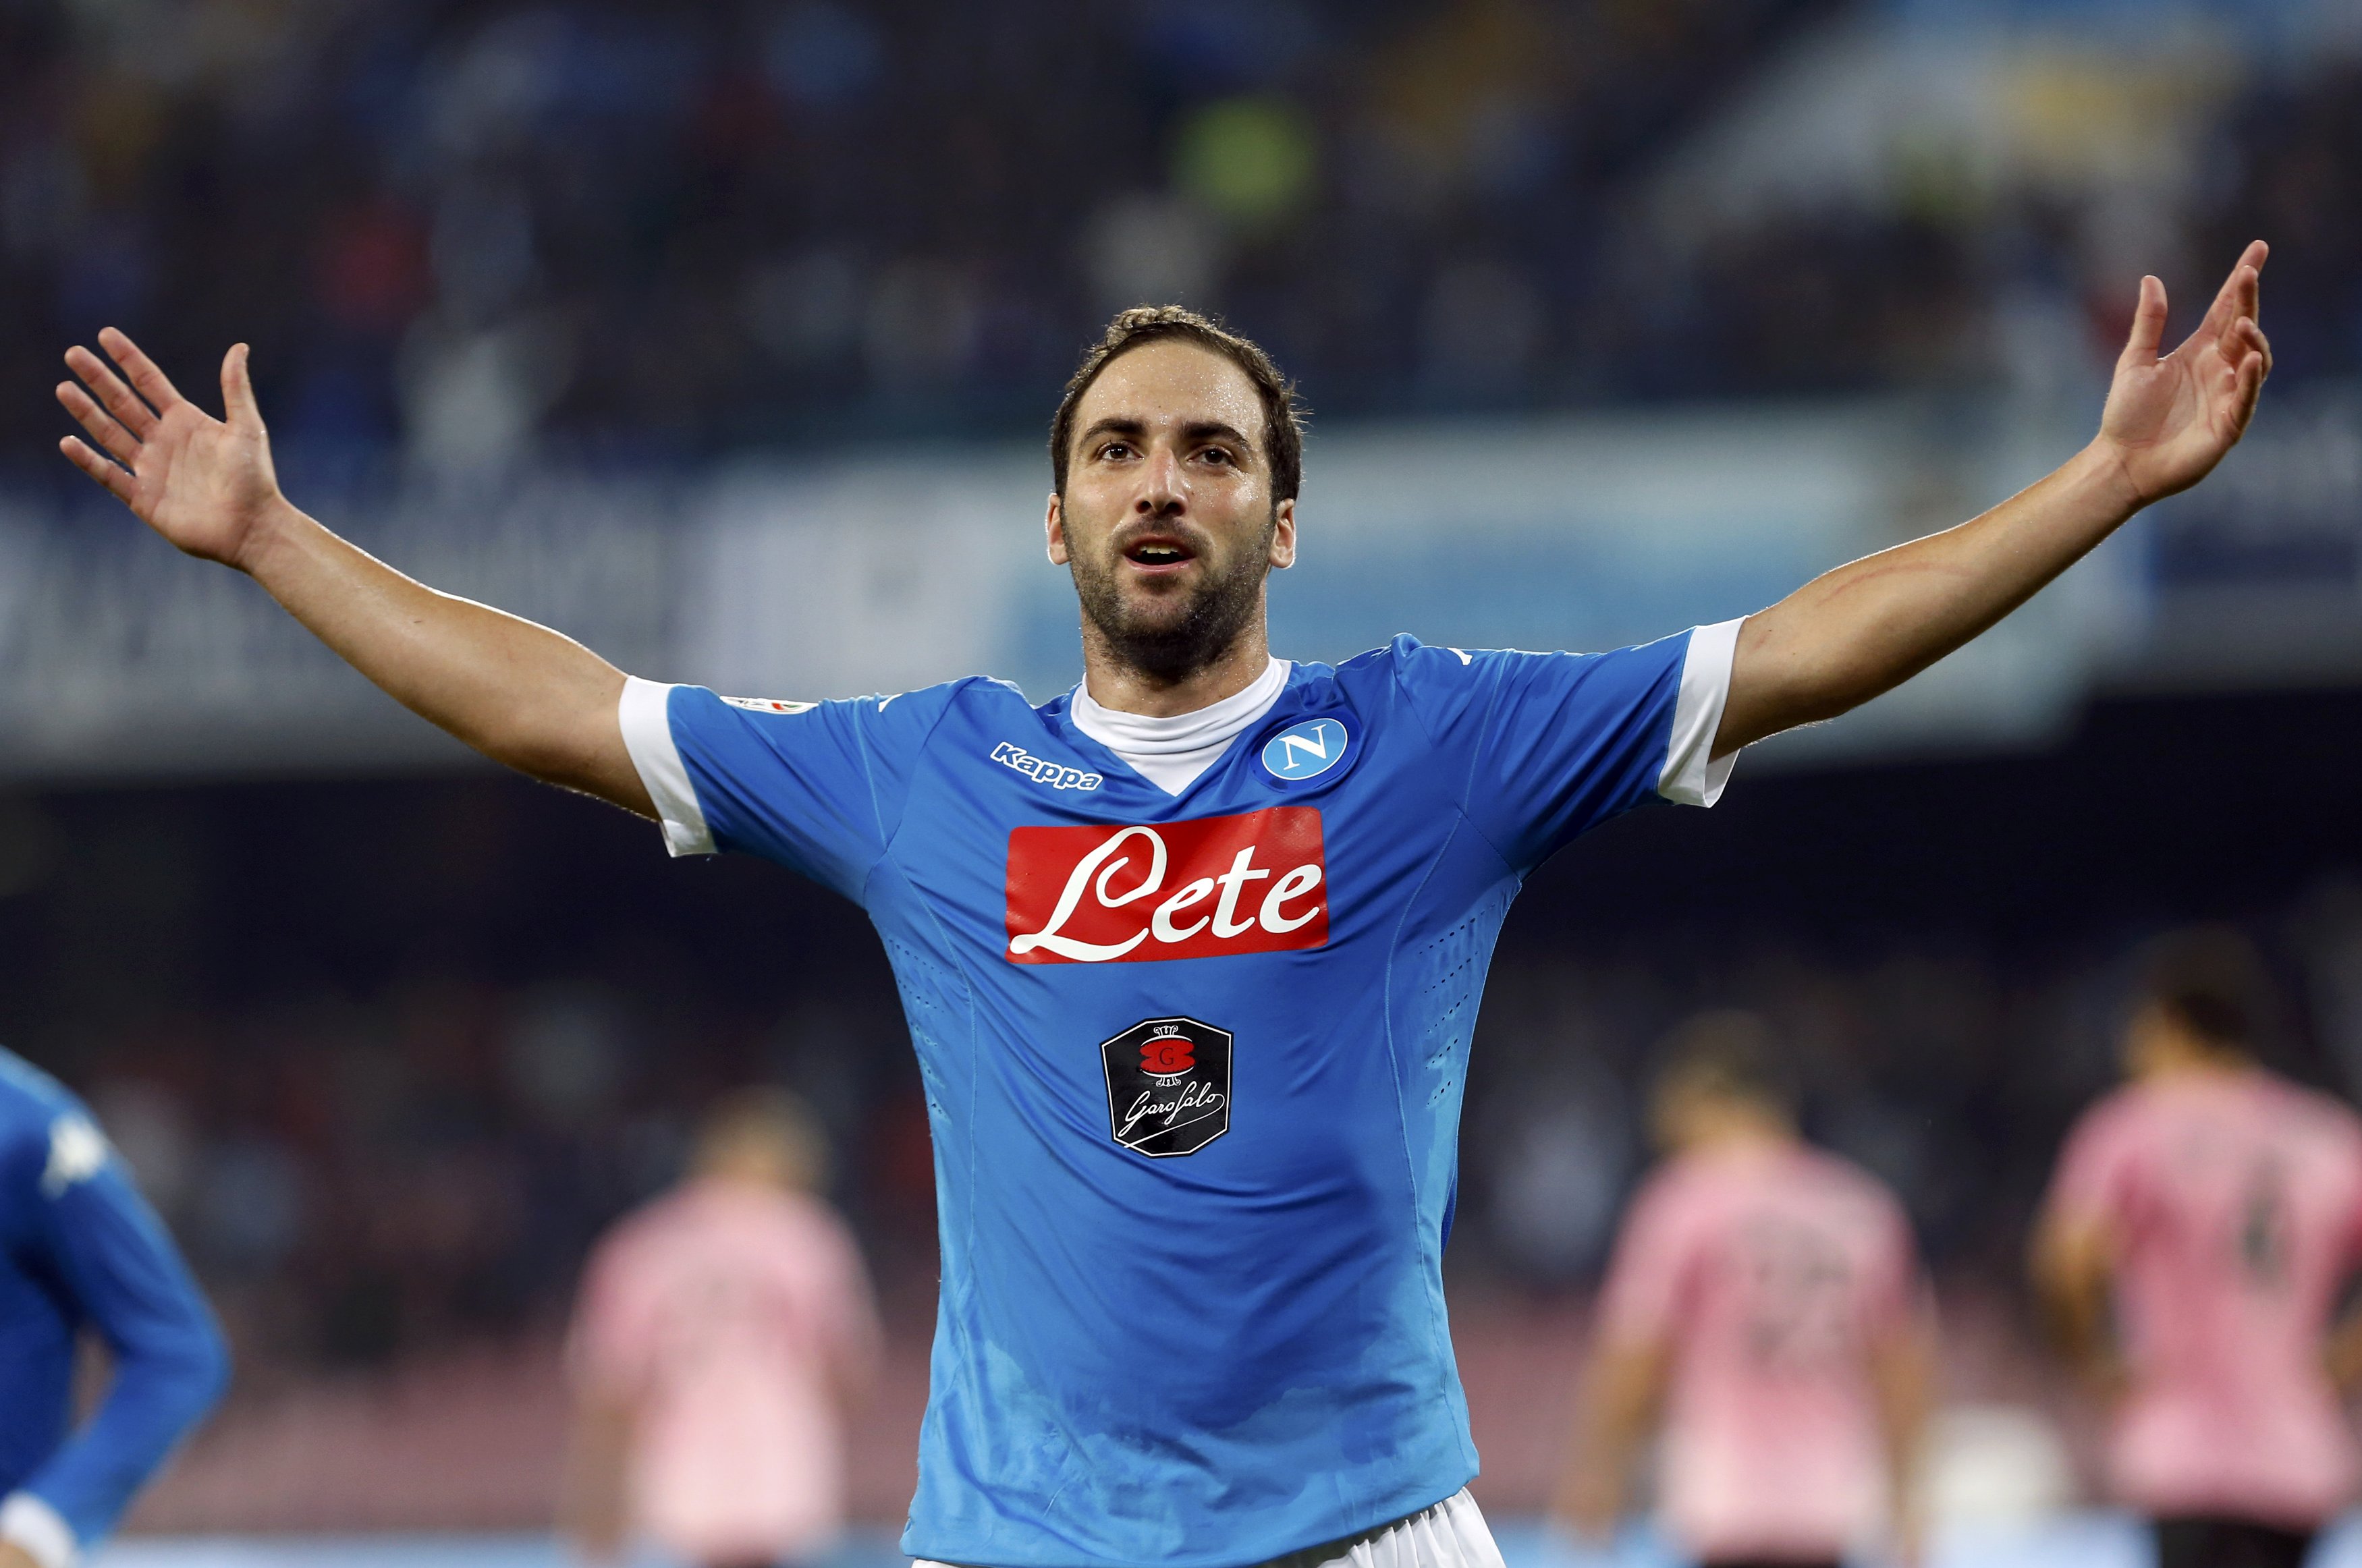 Napoli's Gonzalo Higuain celebrates after scoring against Palermo's during their Serie A soccer match at San Paolo stadium in Napoli, Italy, October 28, 2015. REUTERS/Ciro De Luca